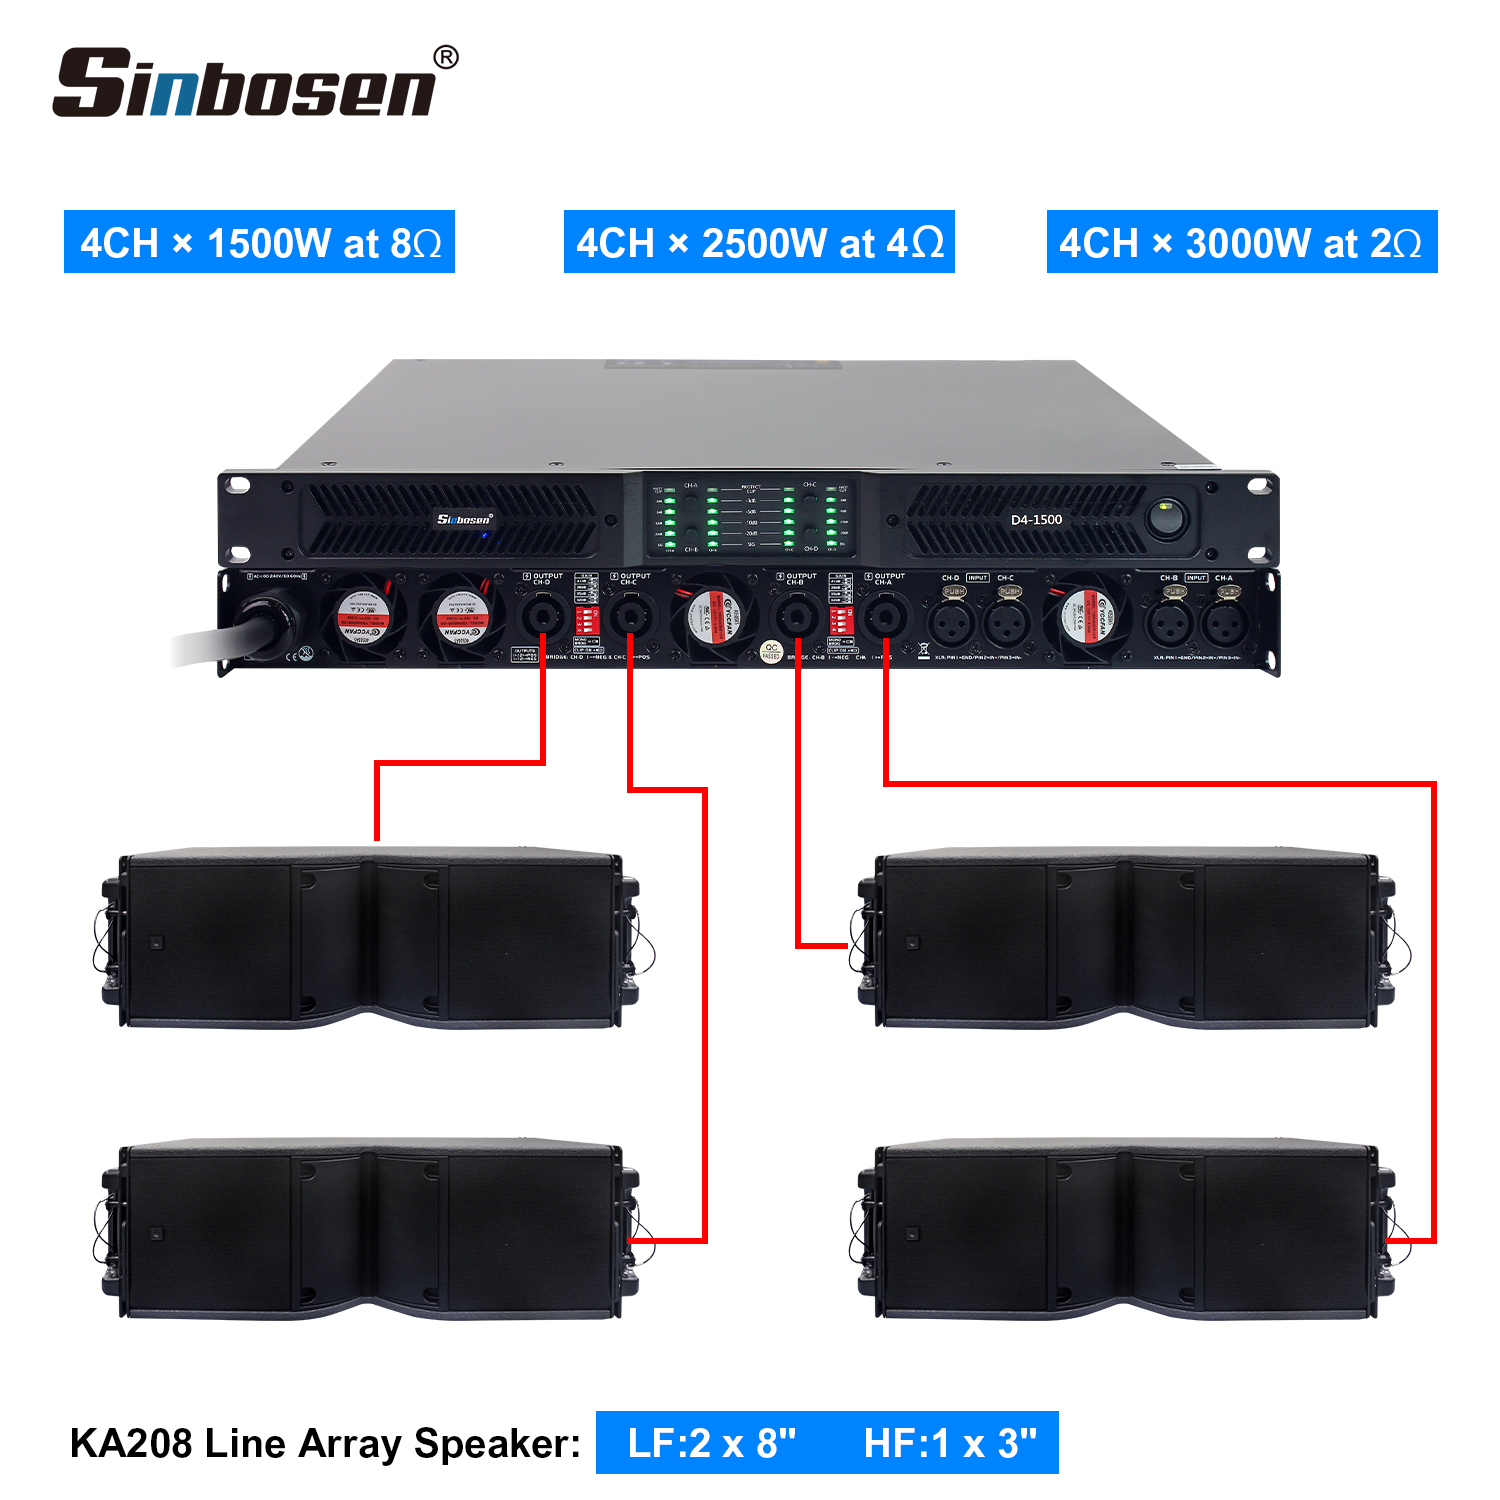 Reference Sheet for Sinbosen Amplifier and High End 3.0 Speaker Matching!